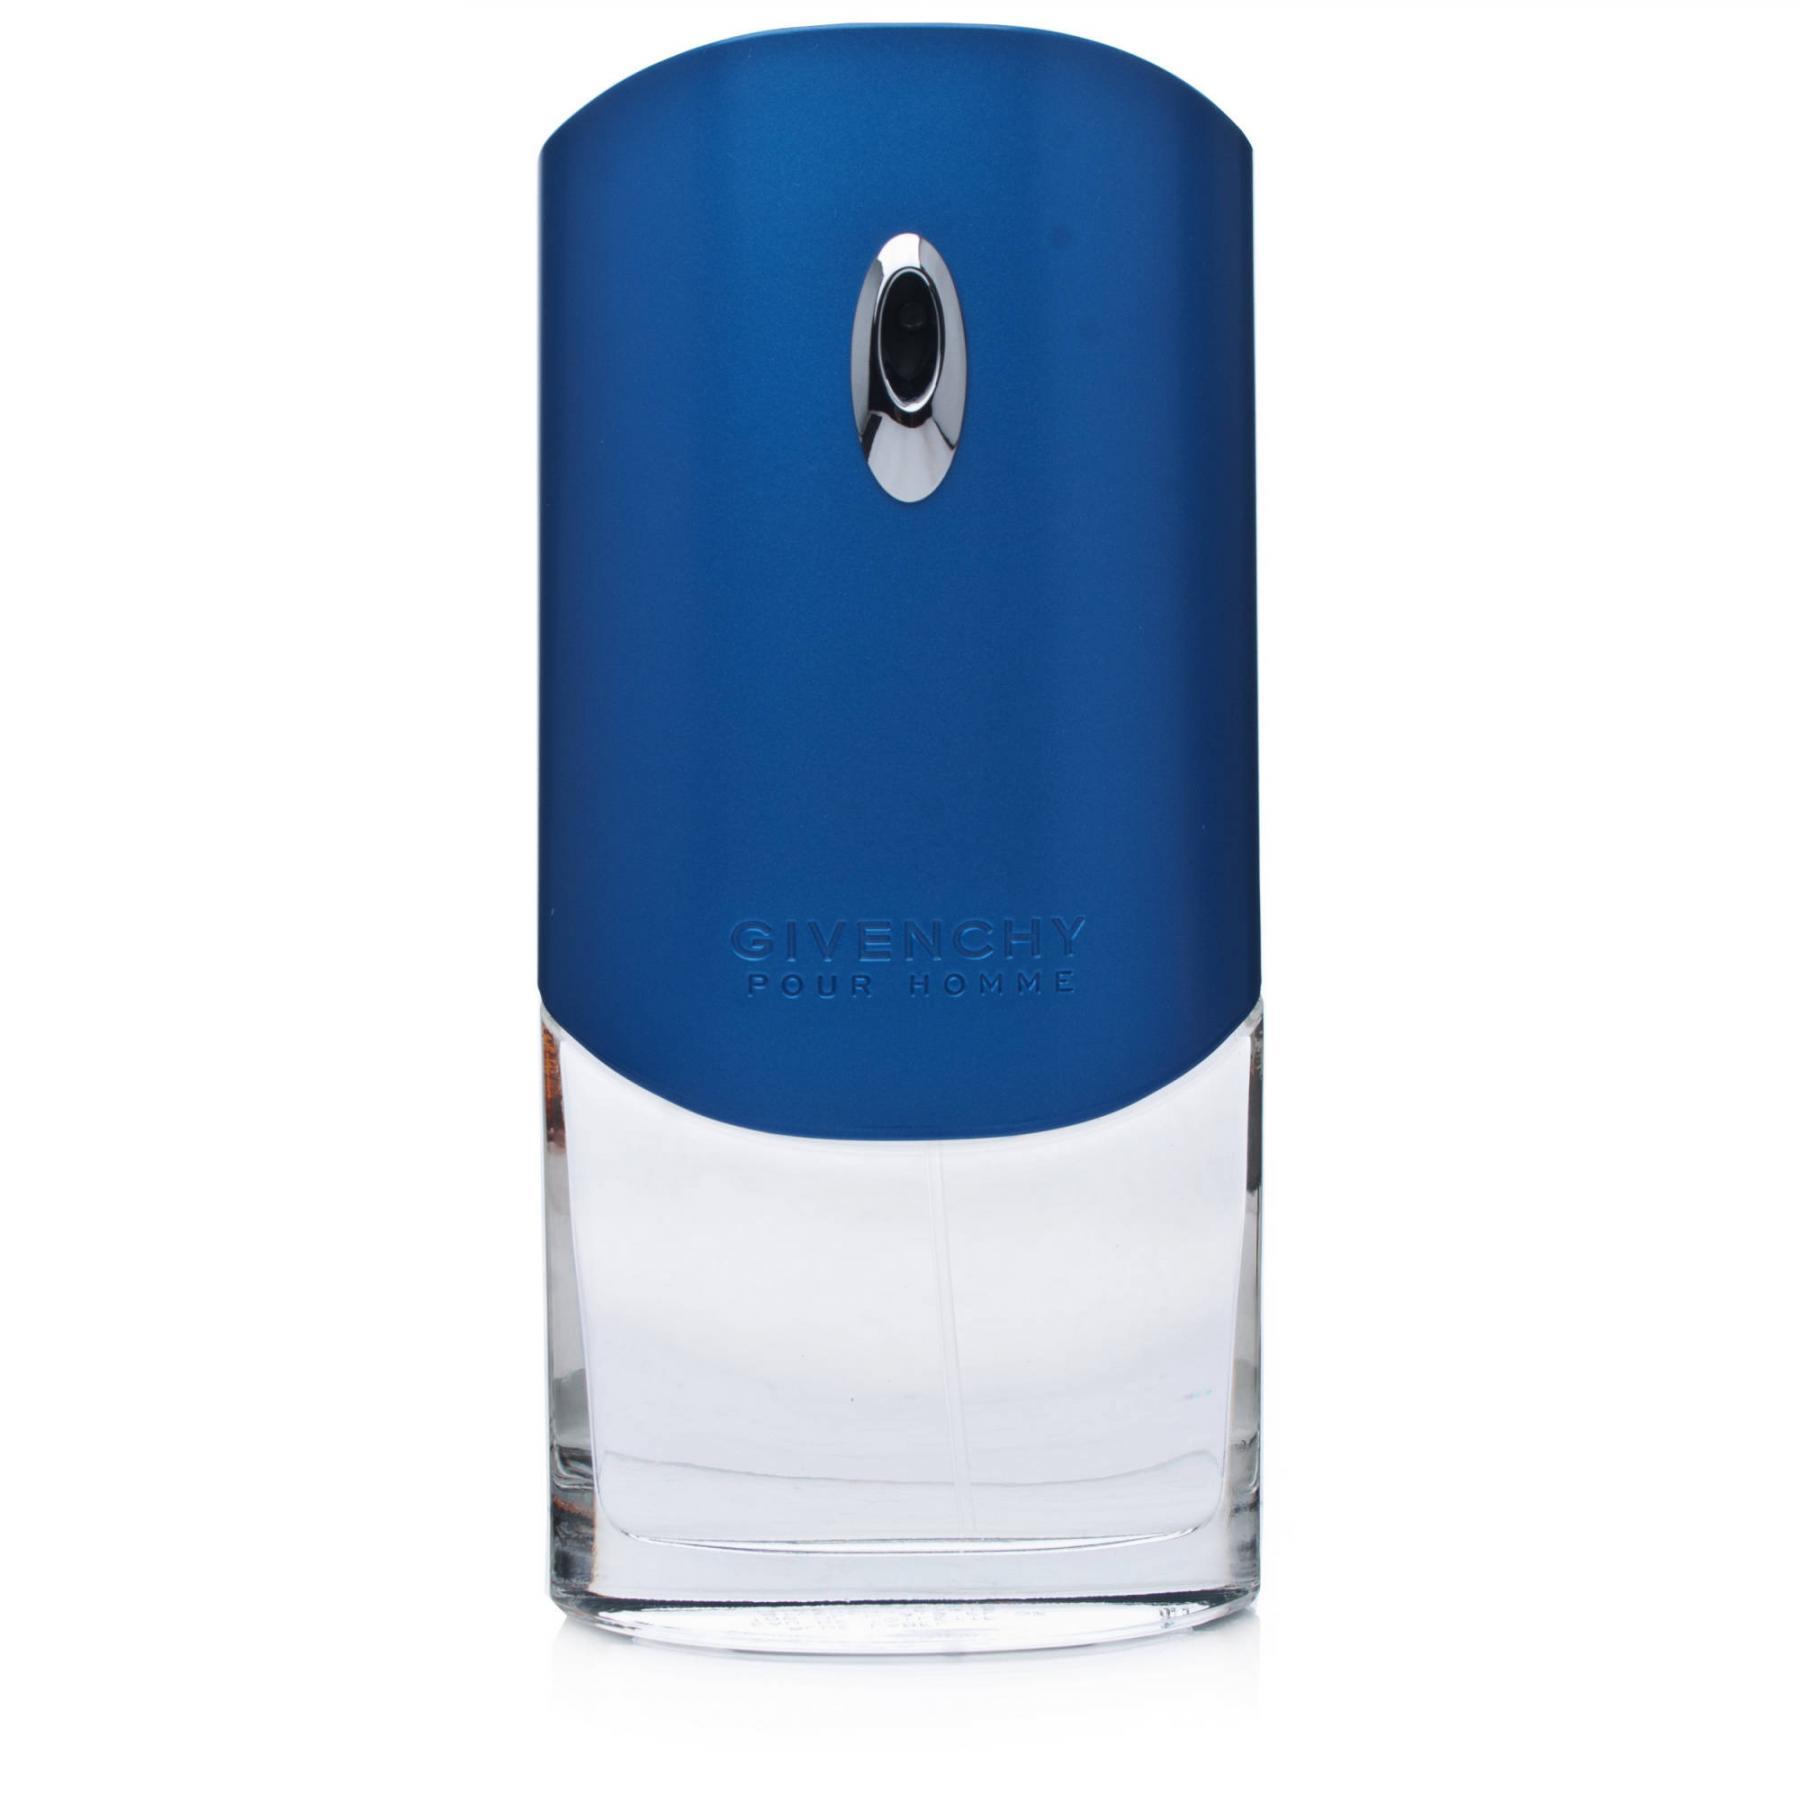 Givenchy pour homme оригинал. Givenchy Blue Label 100 мл. Givenchy pour homme Blue Label 100ml. Туалетная вода Givenchy Givenchy pour homme Blue Label. Givenchy pour homme Blue Label EDT, 100 ml.